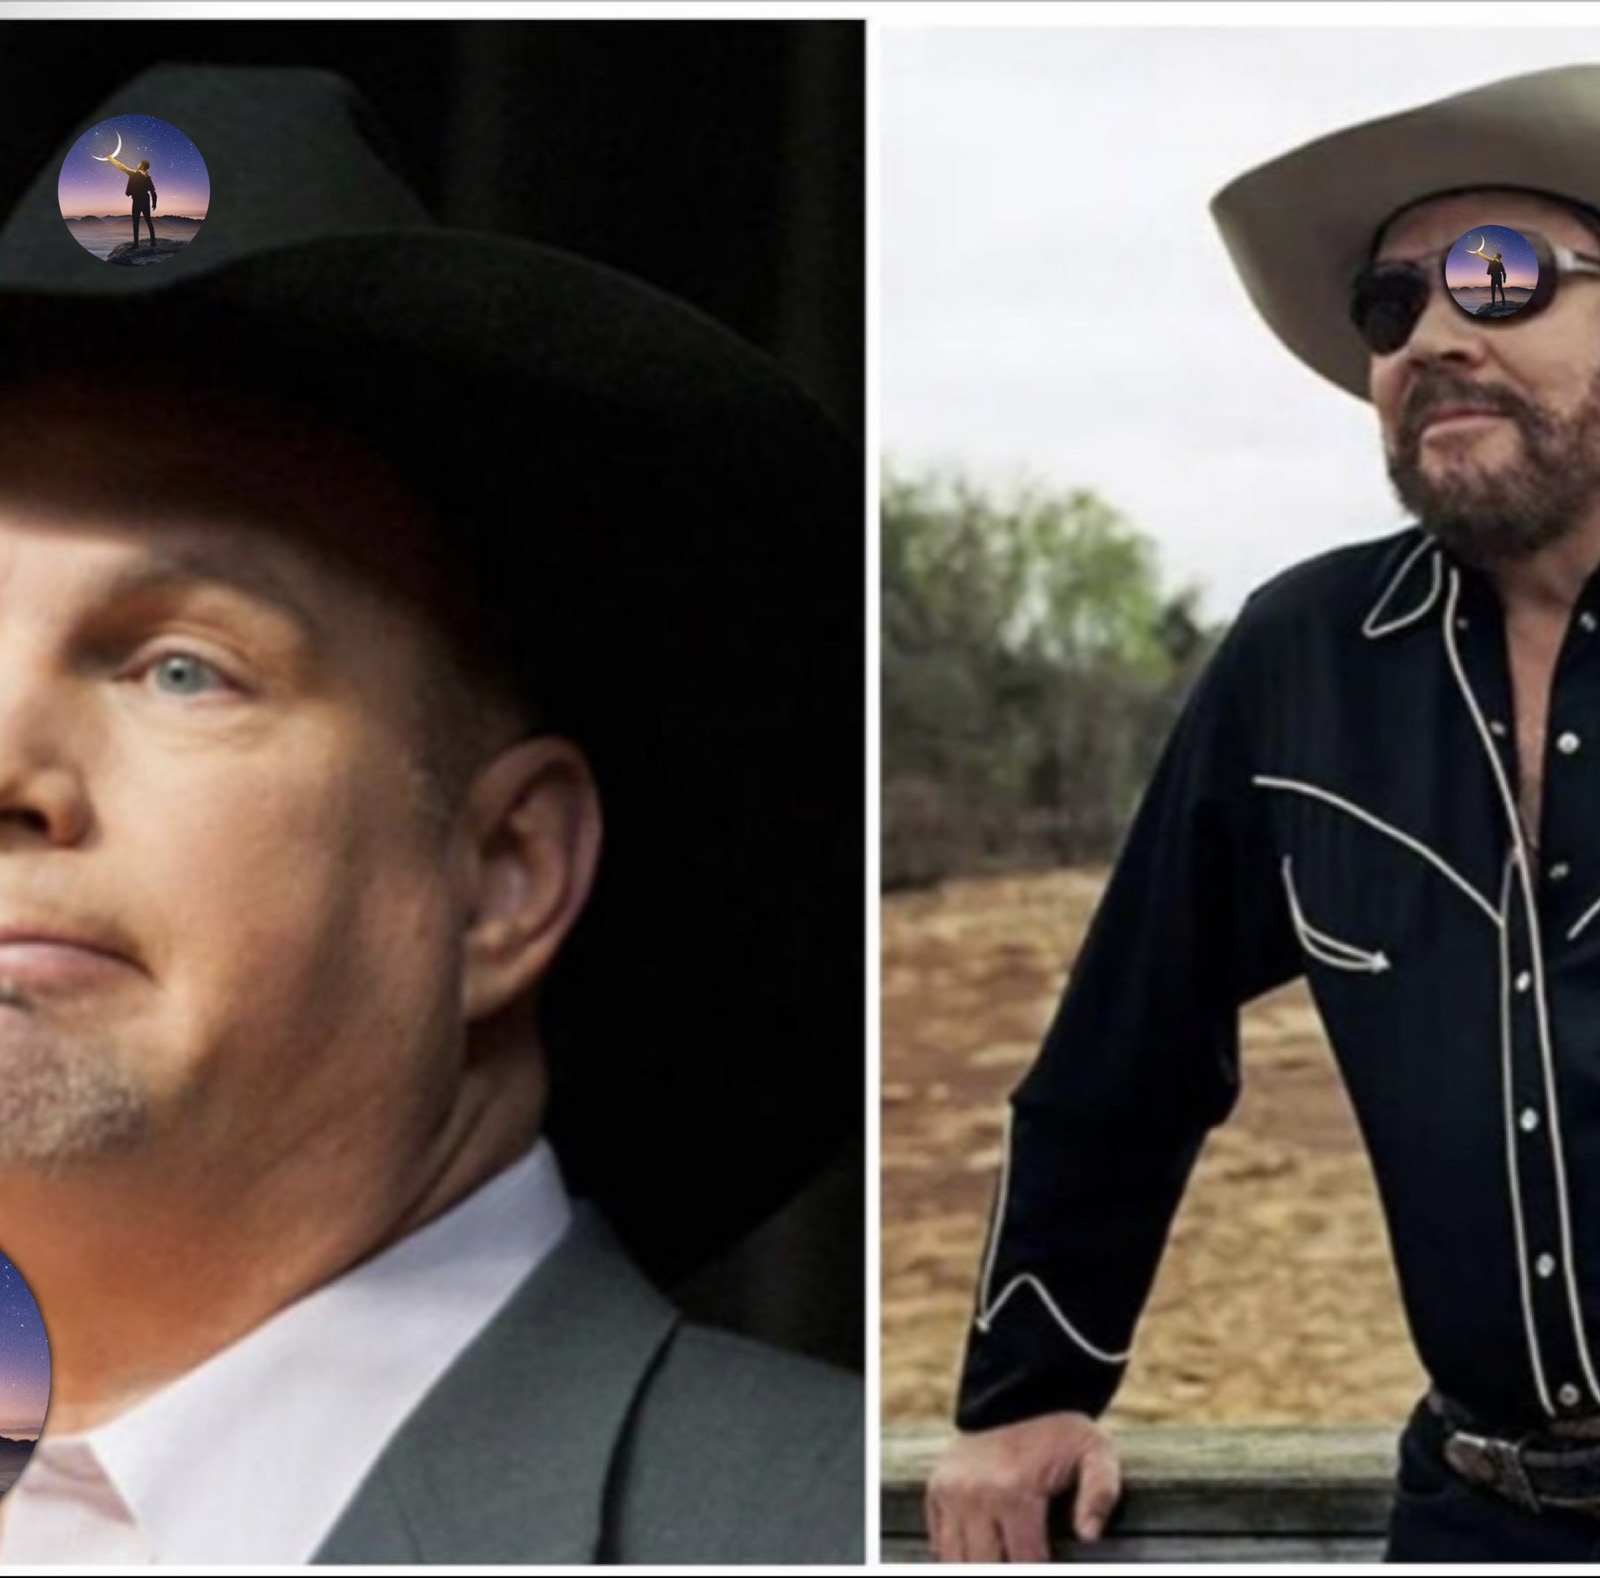 Hank Williams Jr expresses strong disapproval of sharing the stage with Garth Brooks, stating he “wouldn’t be caught dead” performing alongside him.